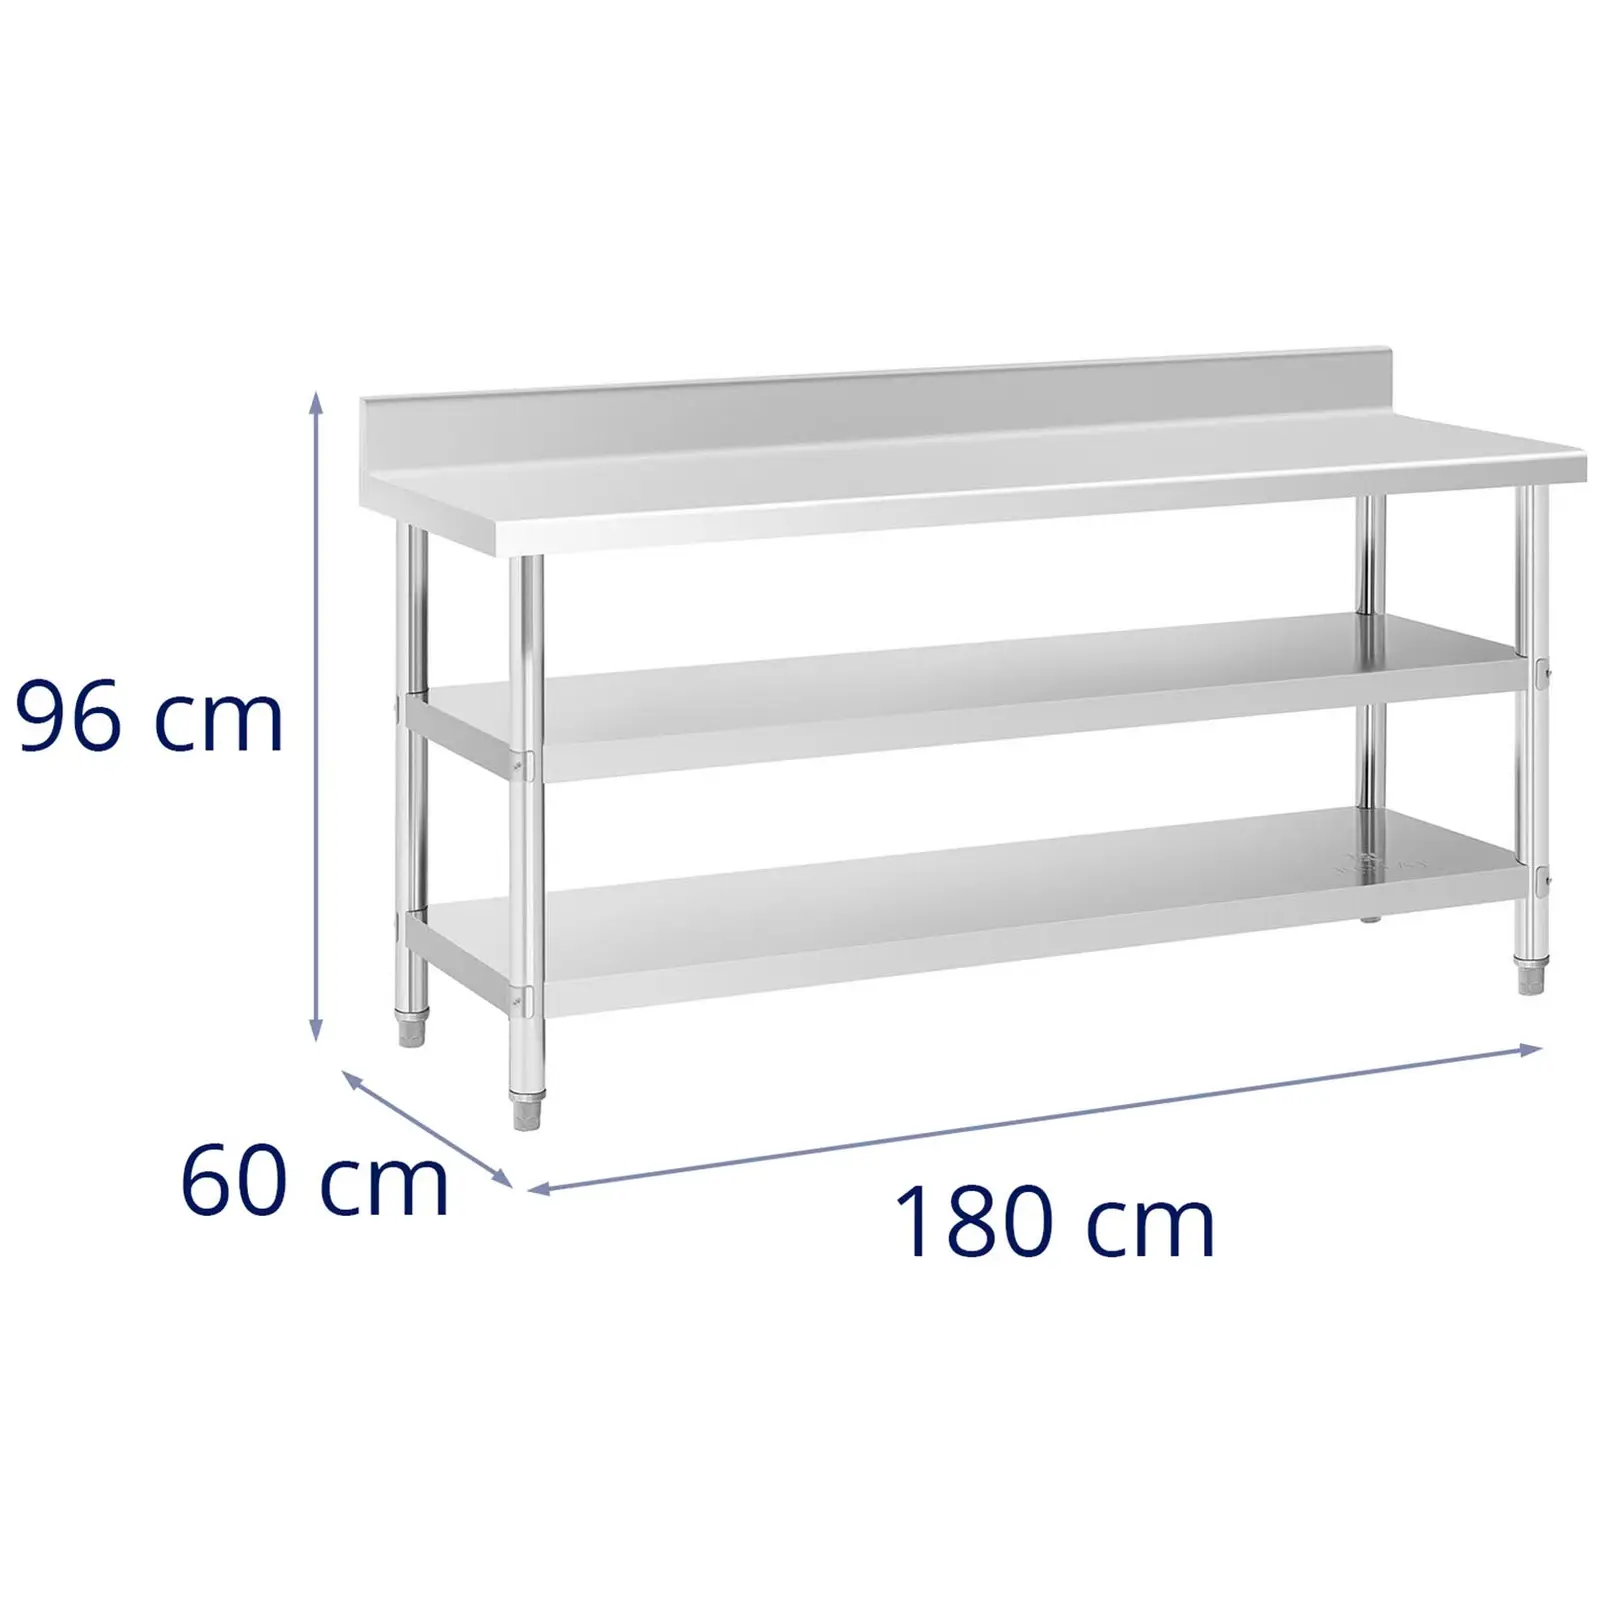 Stainless Steel Work Table with upstand - 180 x 60 x 16.5 cm - 226 kg - 2 shelves - Royal Catering